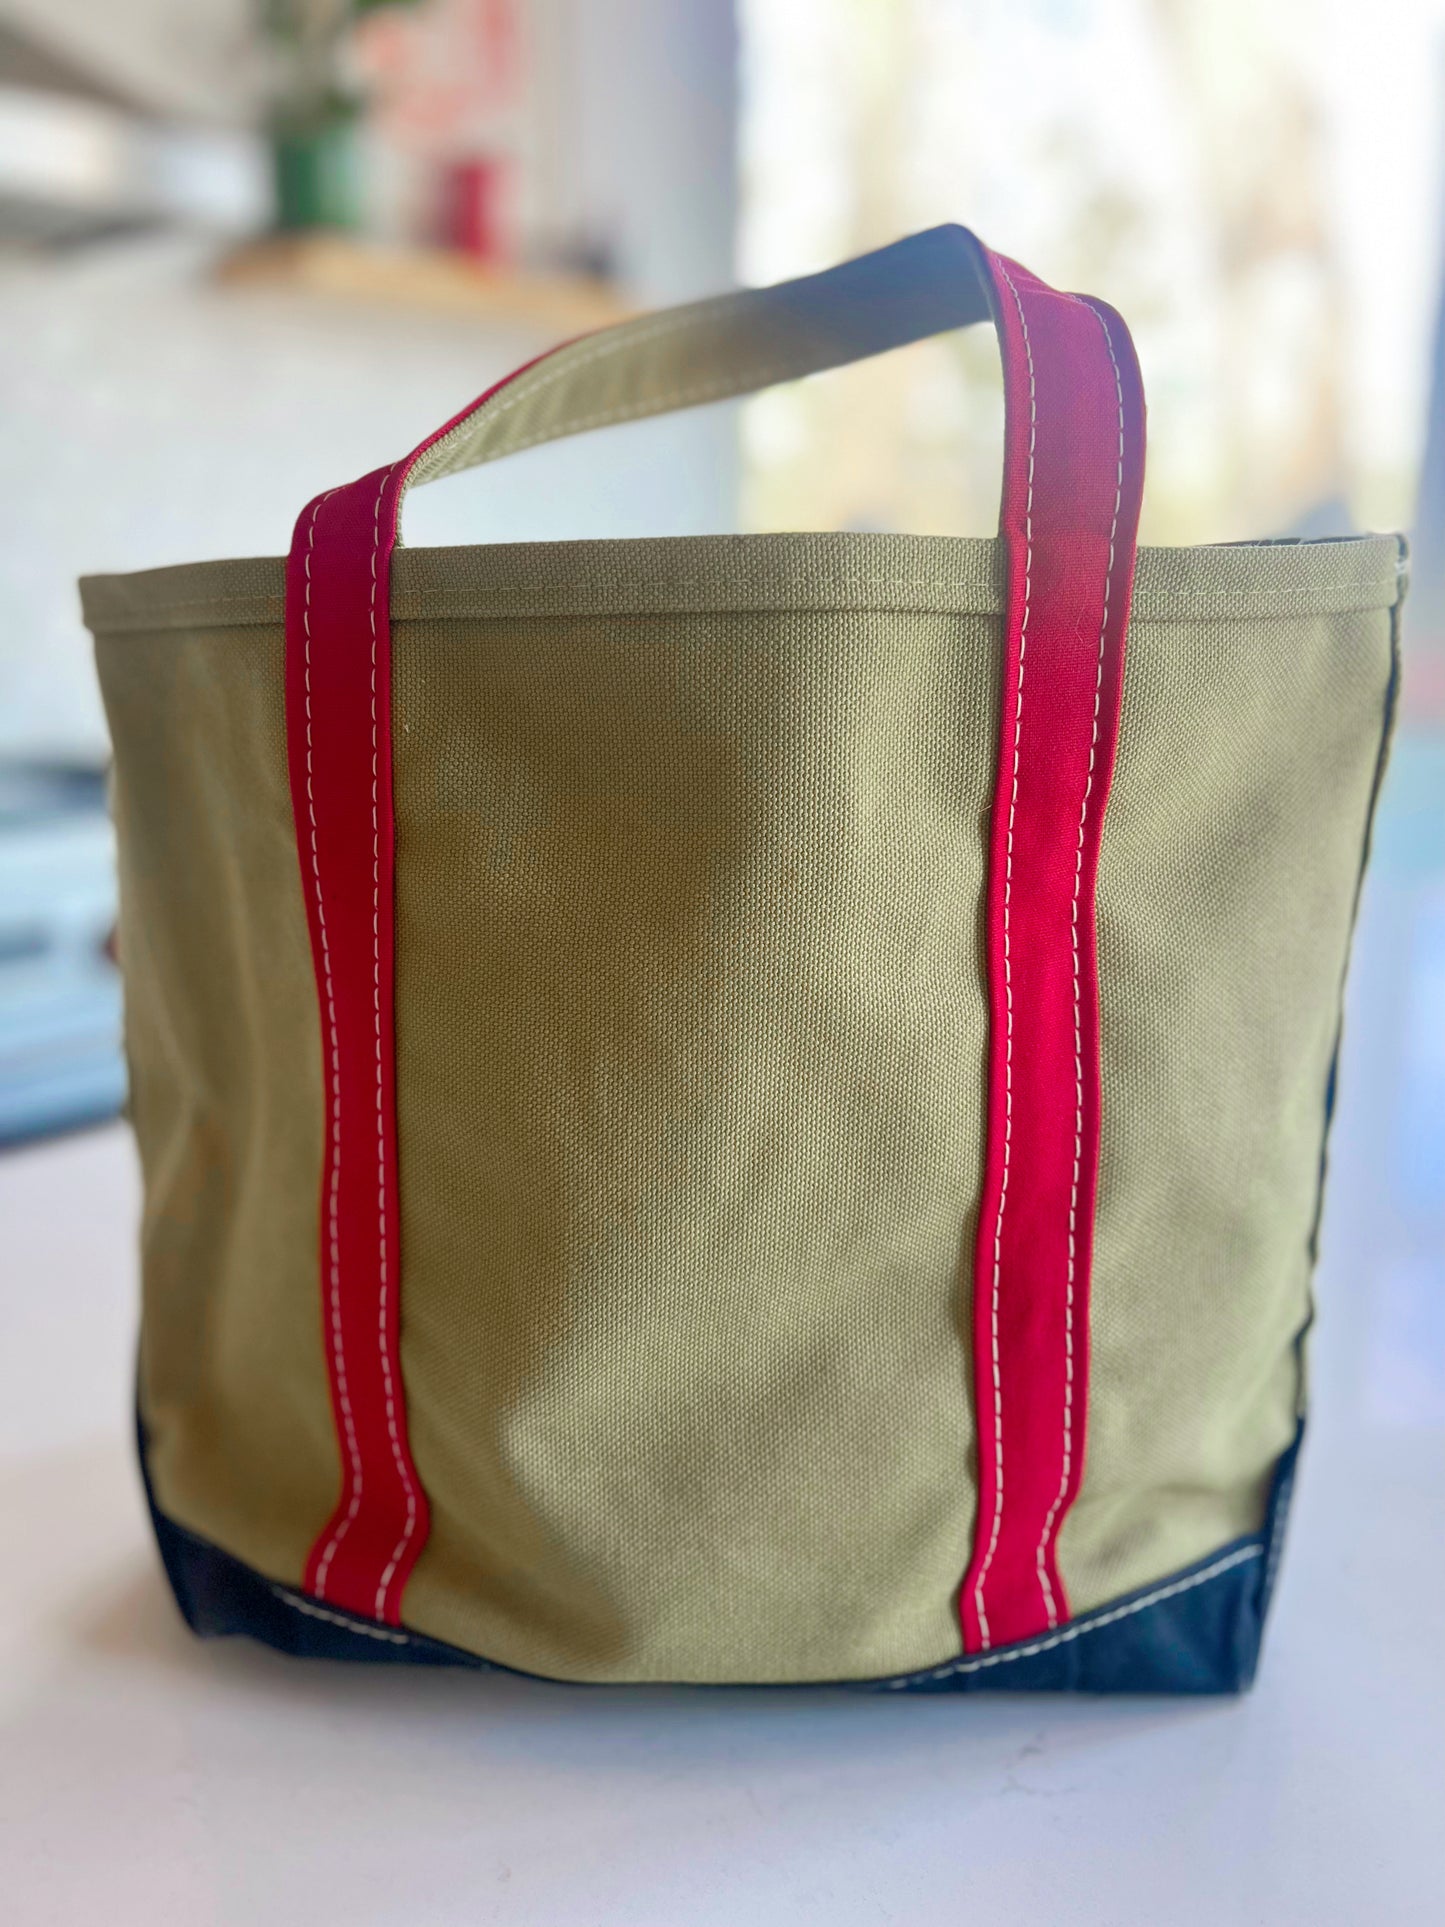 Classic New England Tote